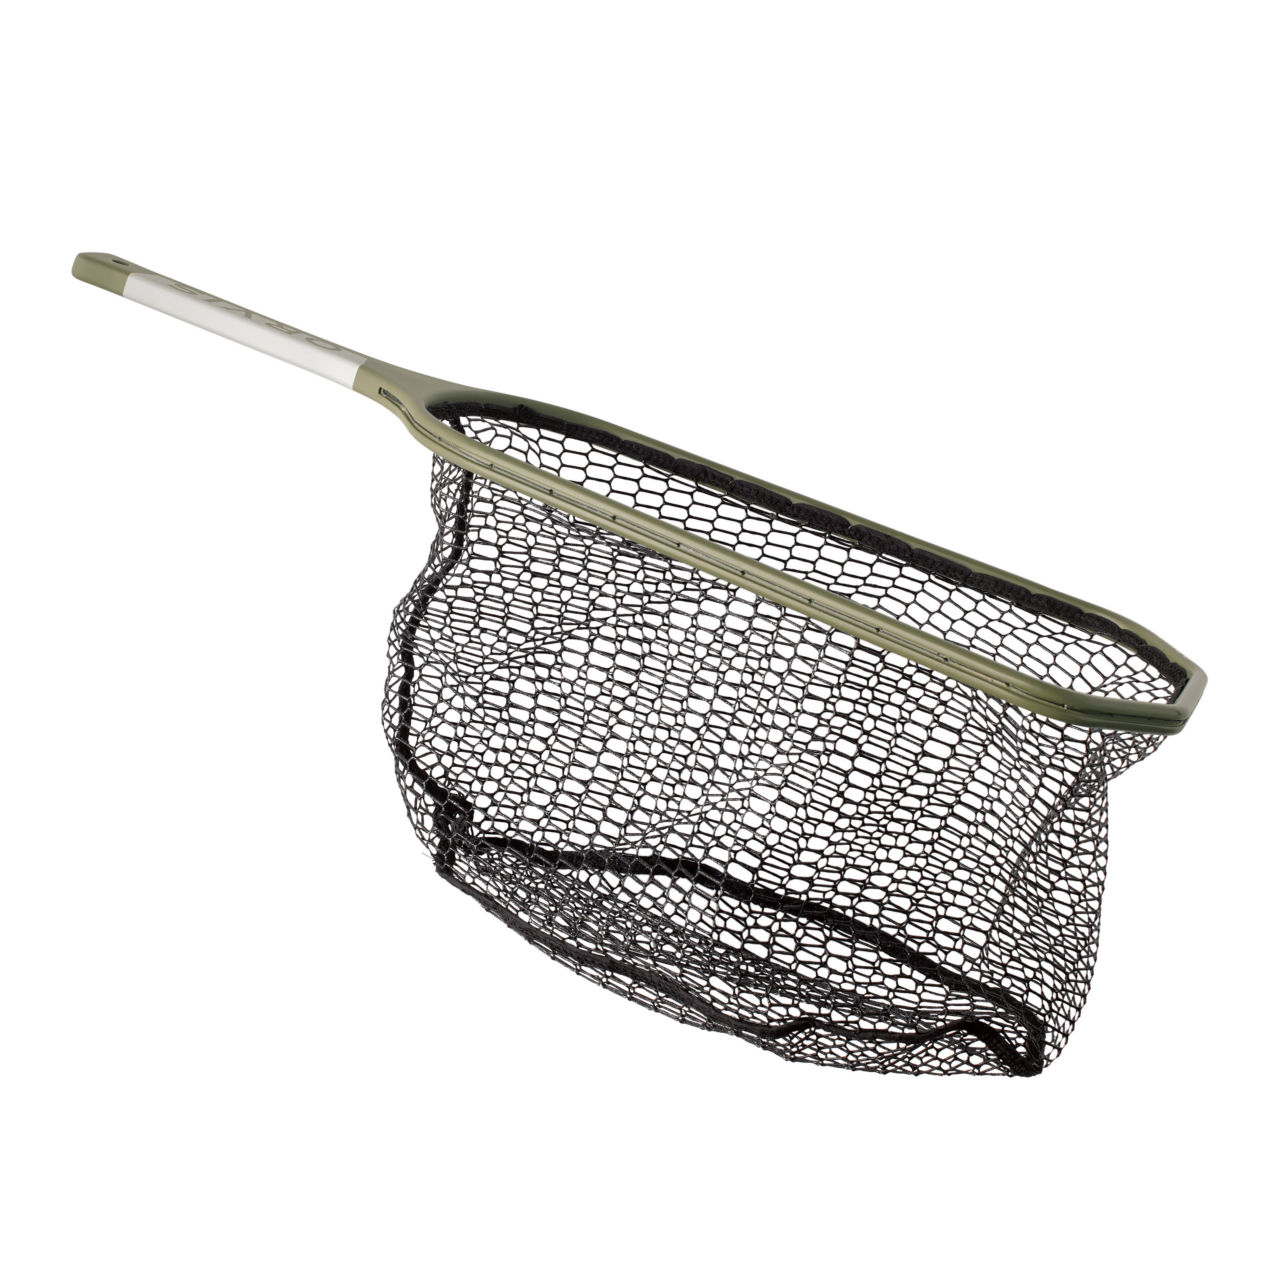 Orvis Wide-Mouth Hand Net - DUSTY OLIVE image number 1